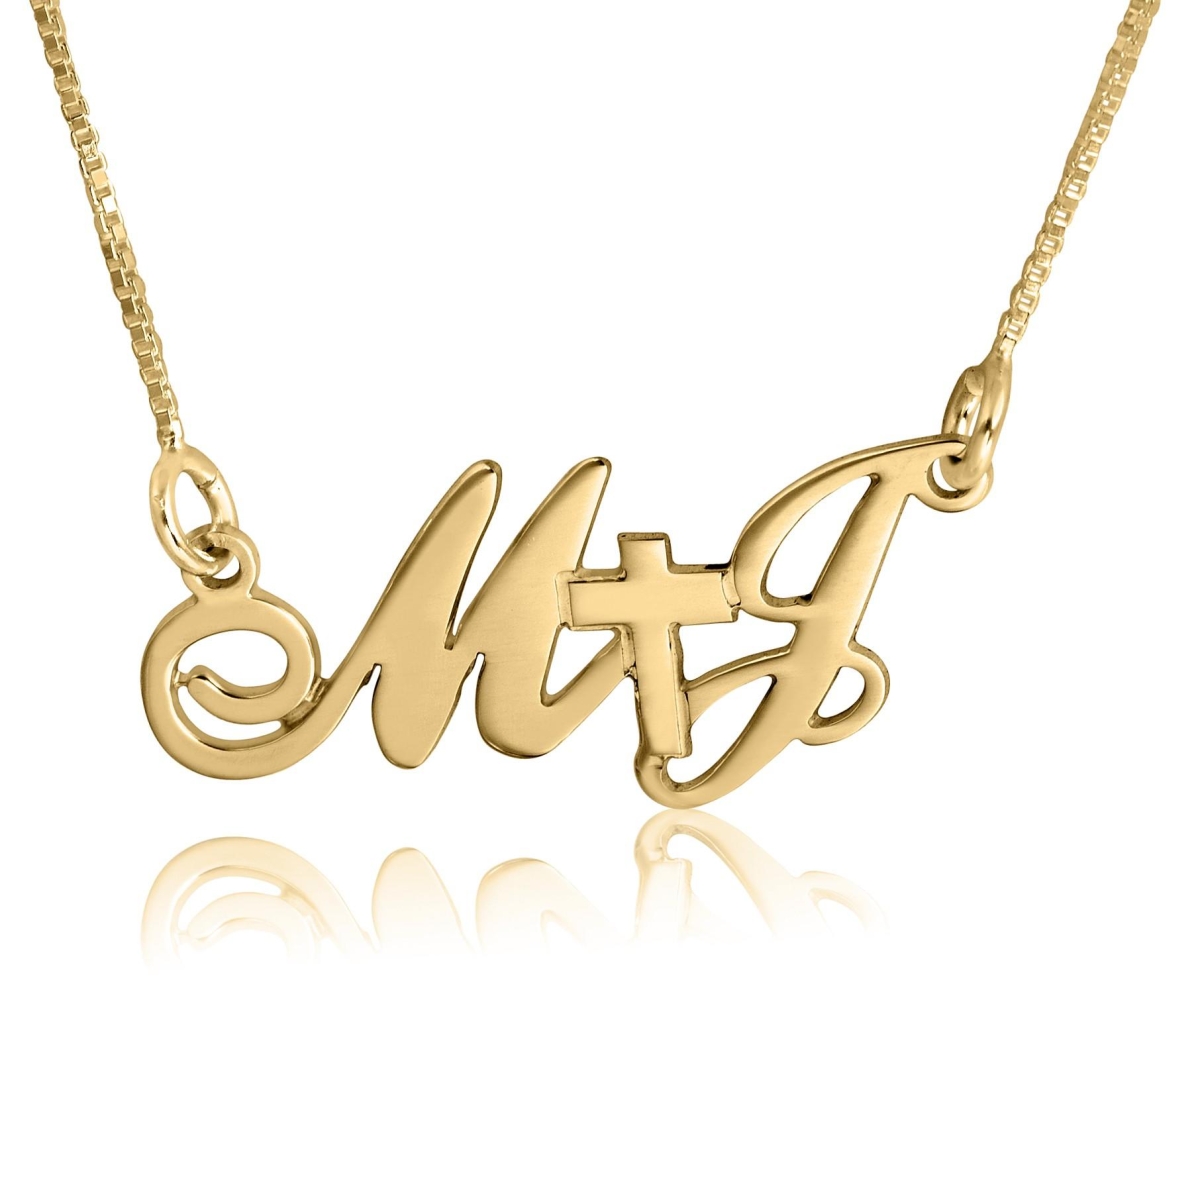 24K Gold Plated Joyful Script Initial Necklace with Cross - 1